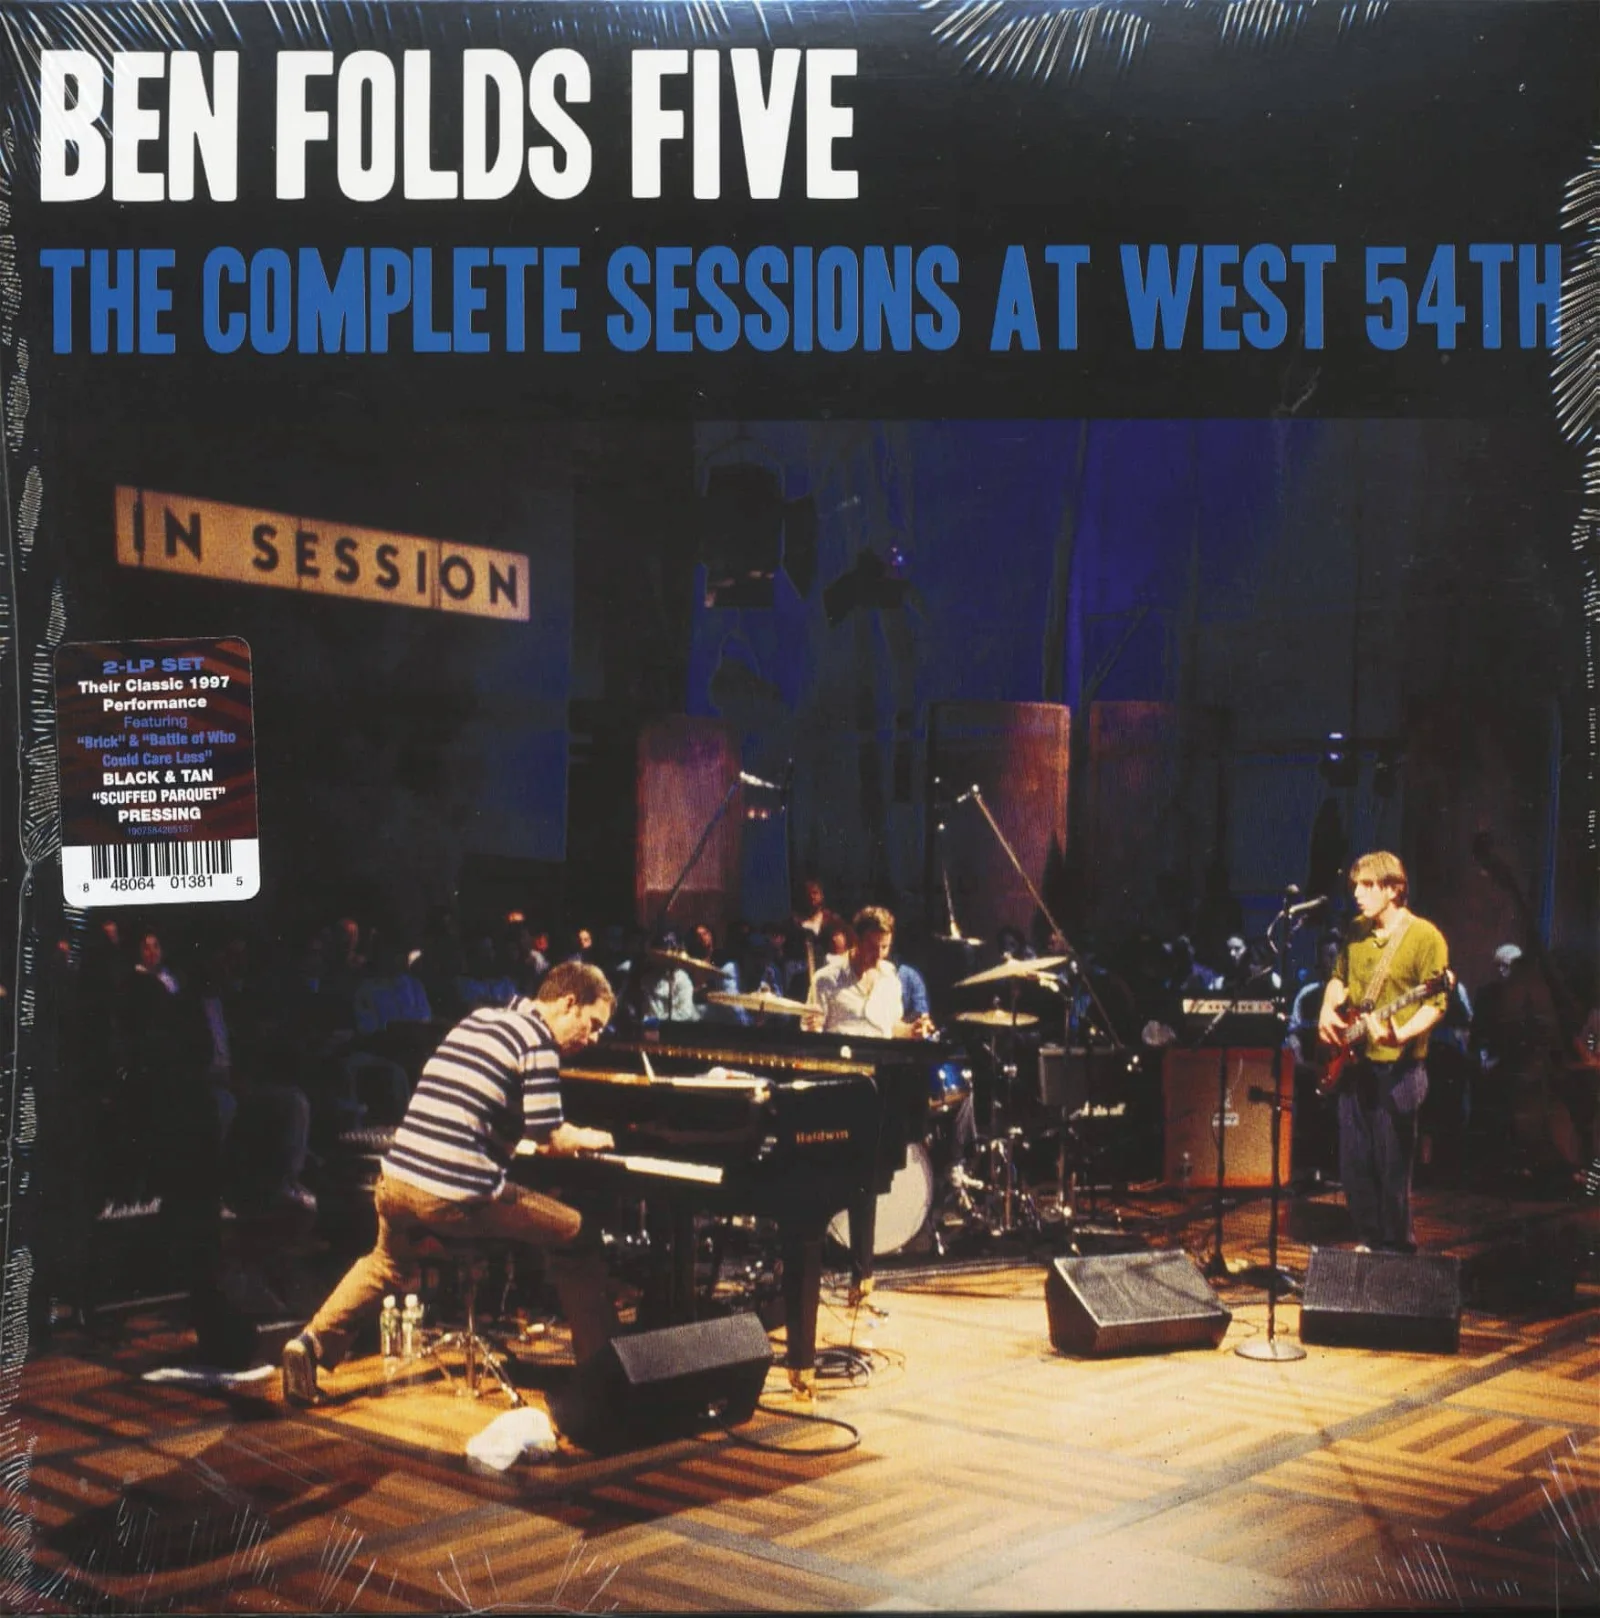 BEN FOLDS FIVE - The Complete Sessions at West 54th Vinyl - JWrayRecords